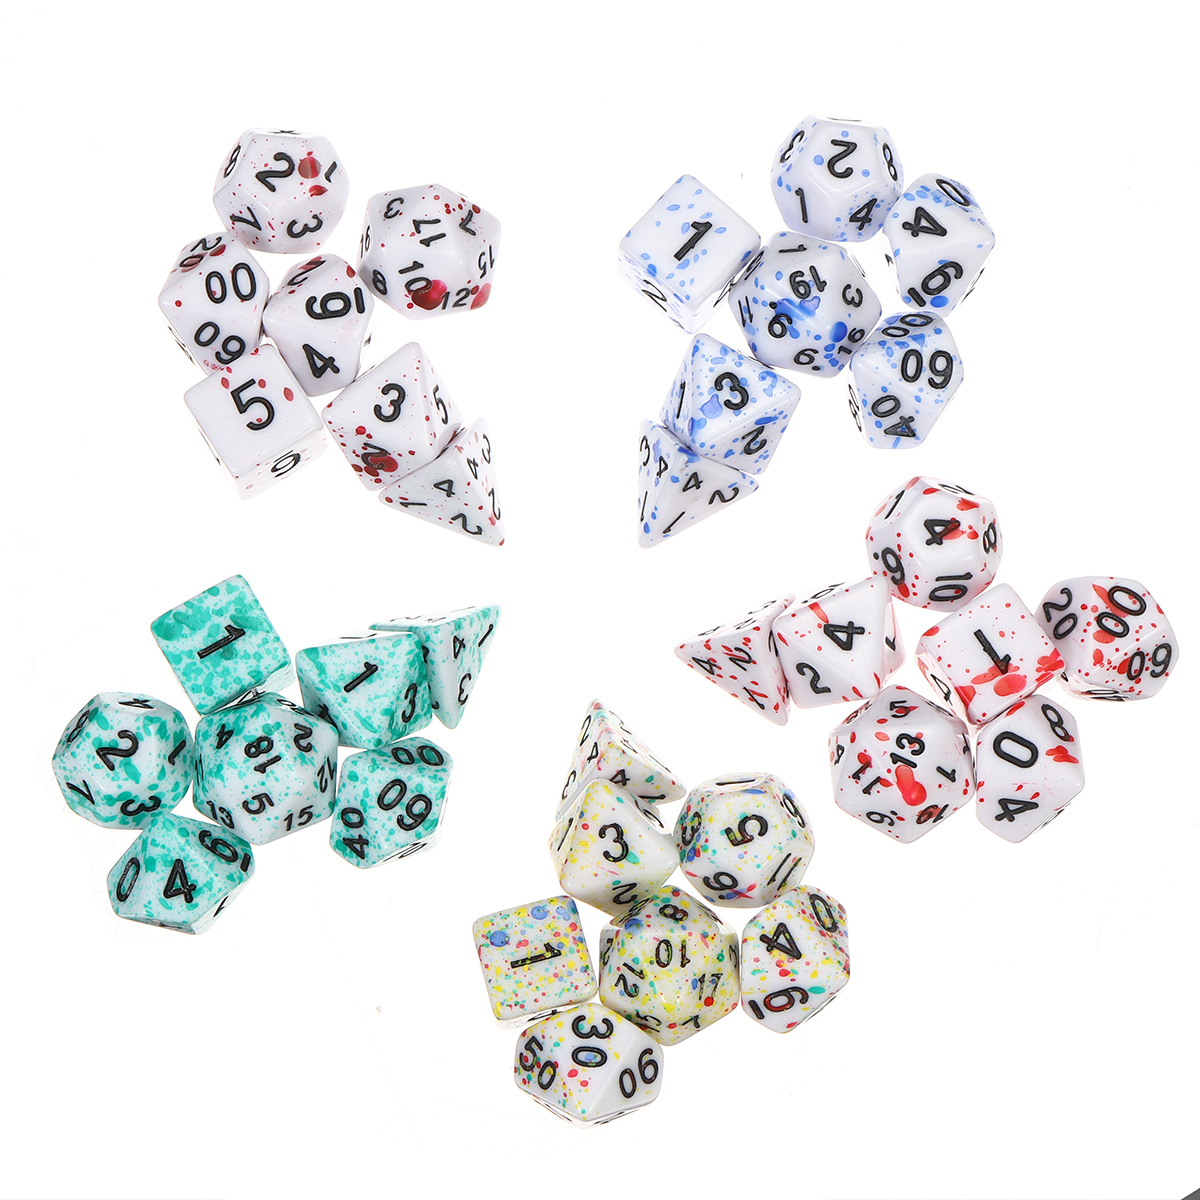 7PCS-Polyhedral-Dices-Set-For-DND-Dungeons--Dragons-Dice-Desktop-RPG-Game-1660865-6